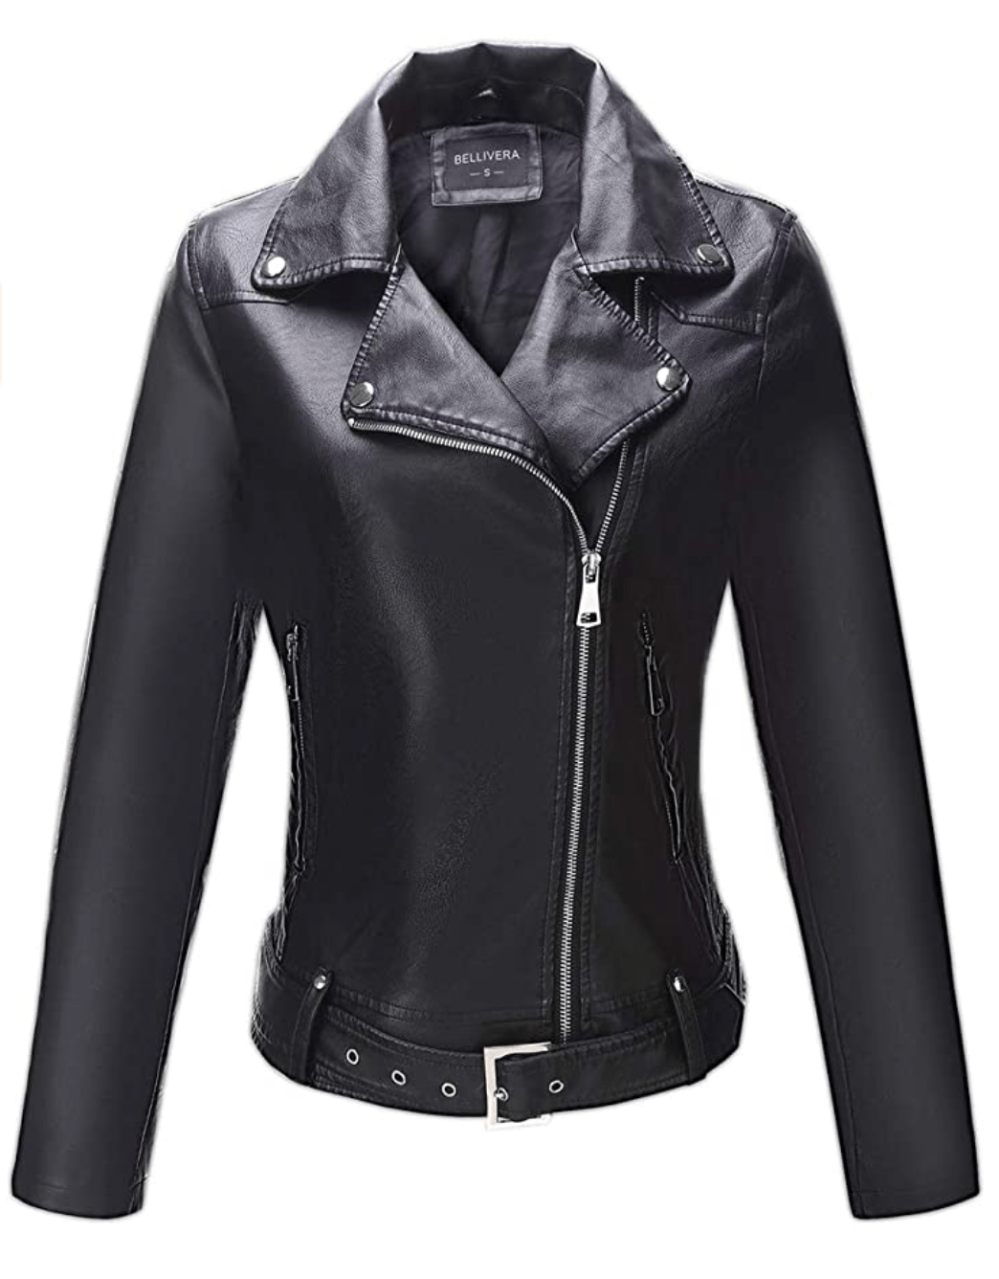 Bellivera Classic Moto Jacket Is a Must-Have for Spring